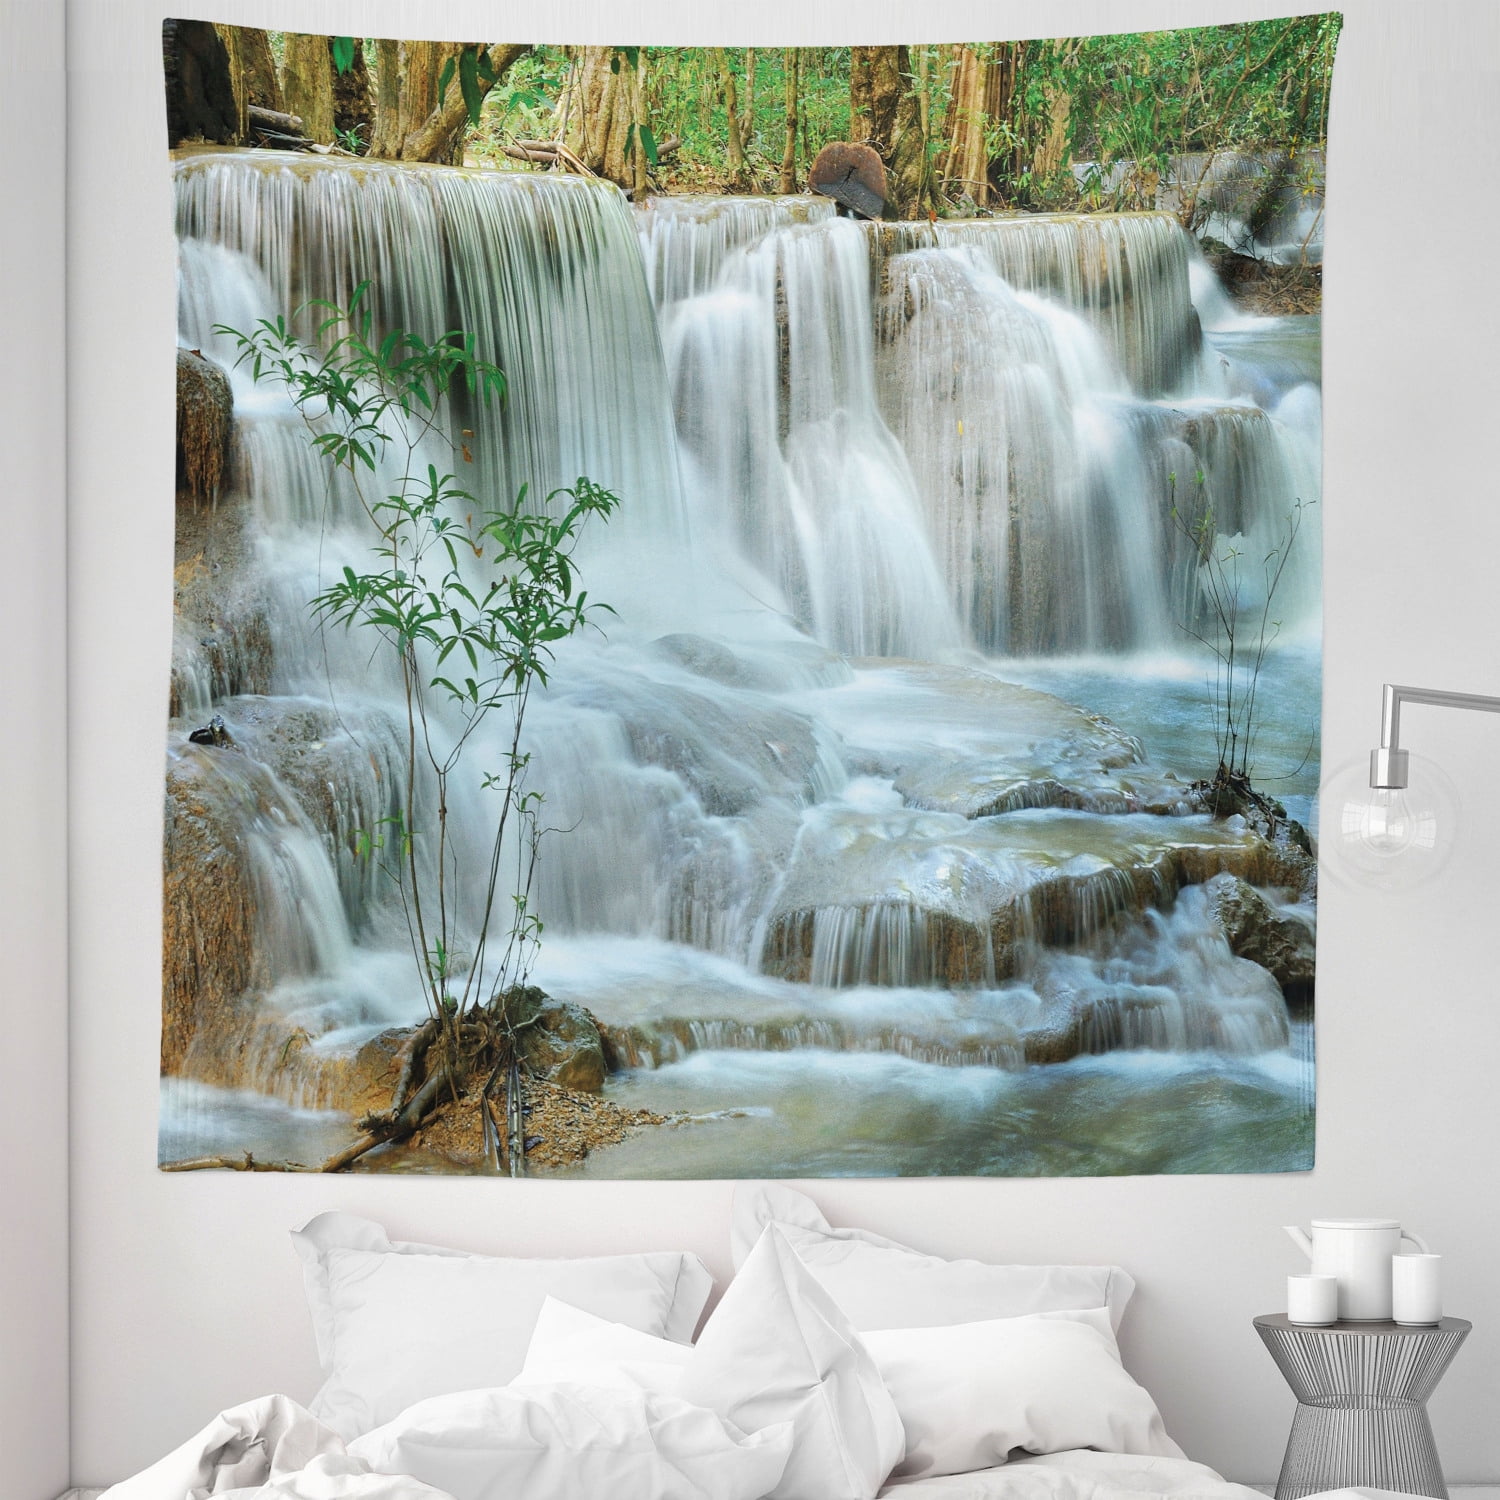 View of Nature and Building Tapestry for Living Room Dorm Wall Hanging Rug Decor 